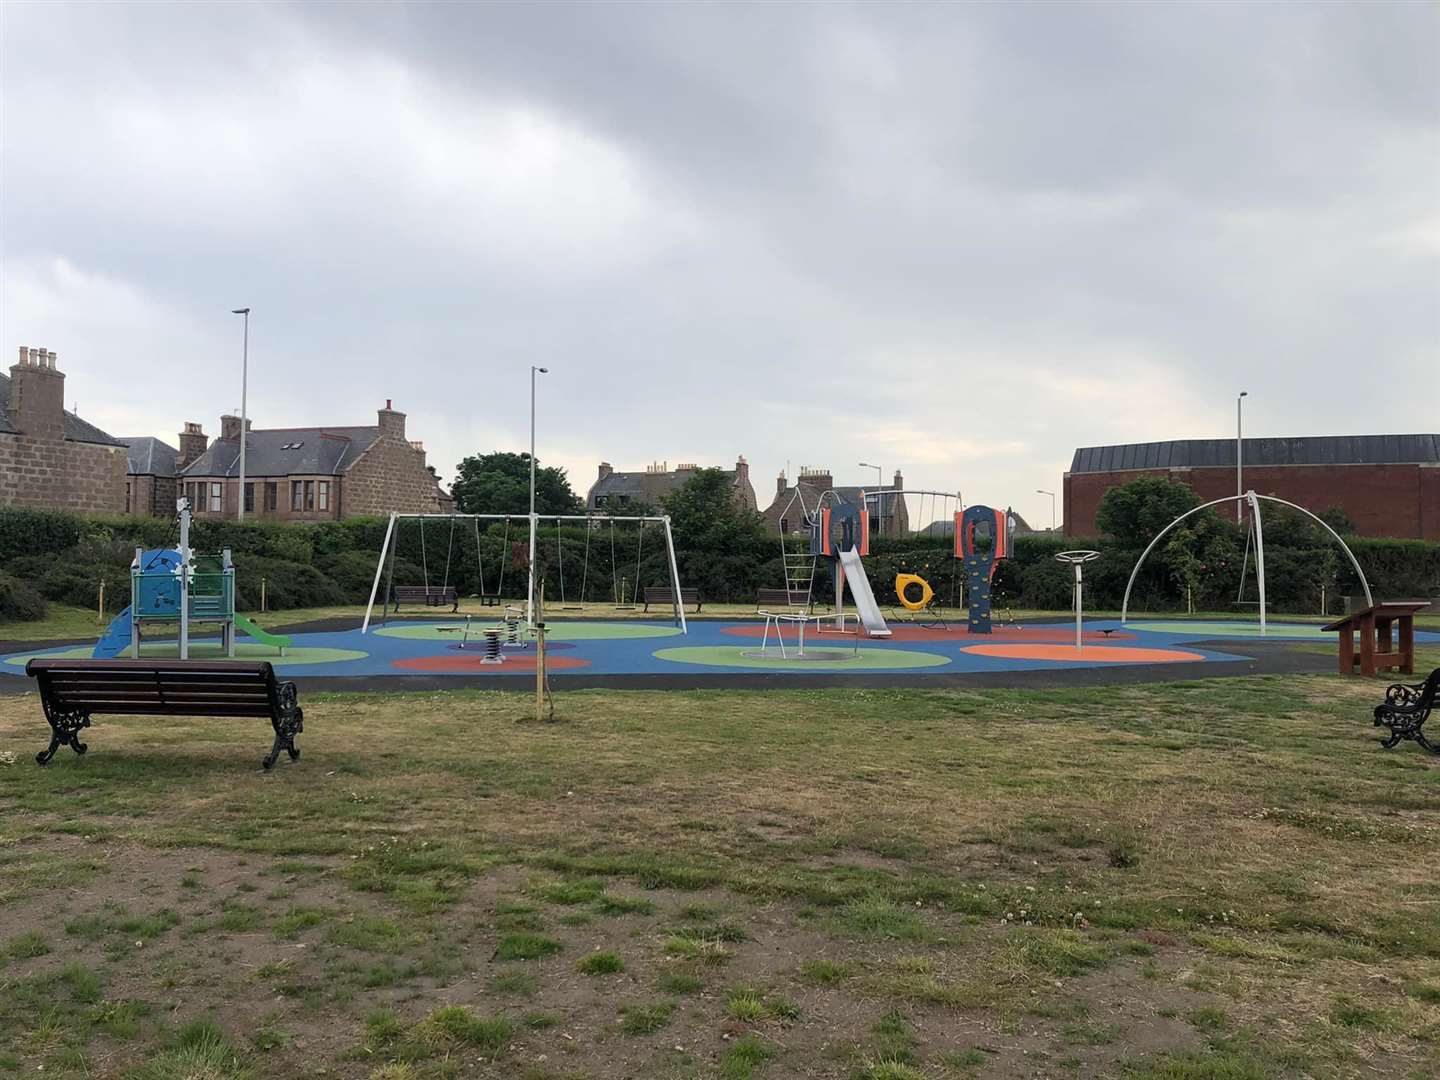 Victoria Community Park has reopened after repairs were completed following vandalism.